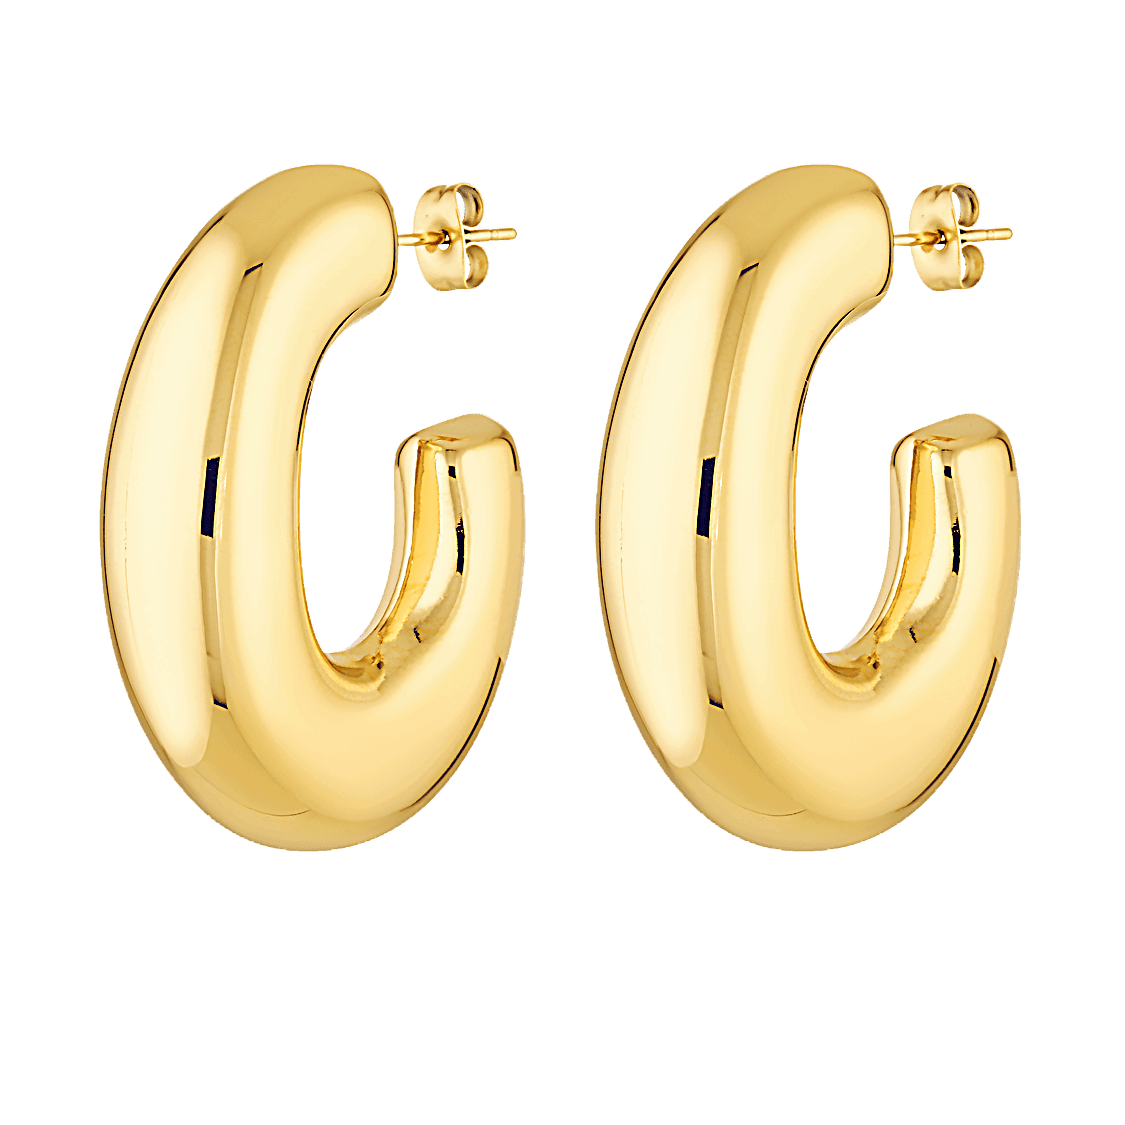 Large gold statement earrings from Bixby